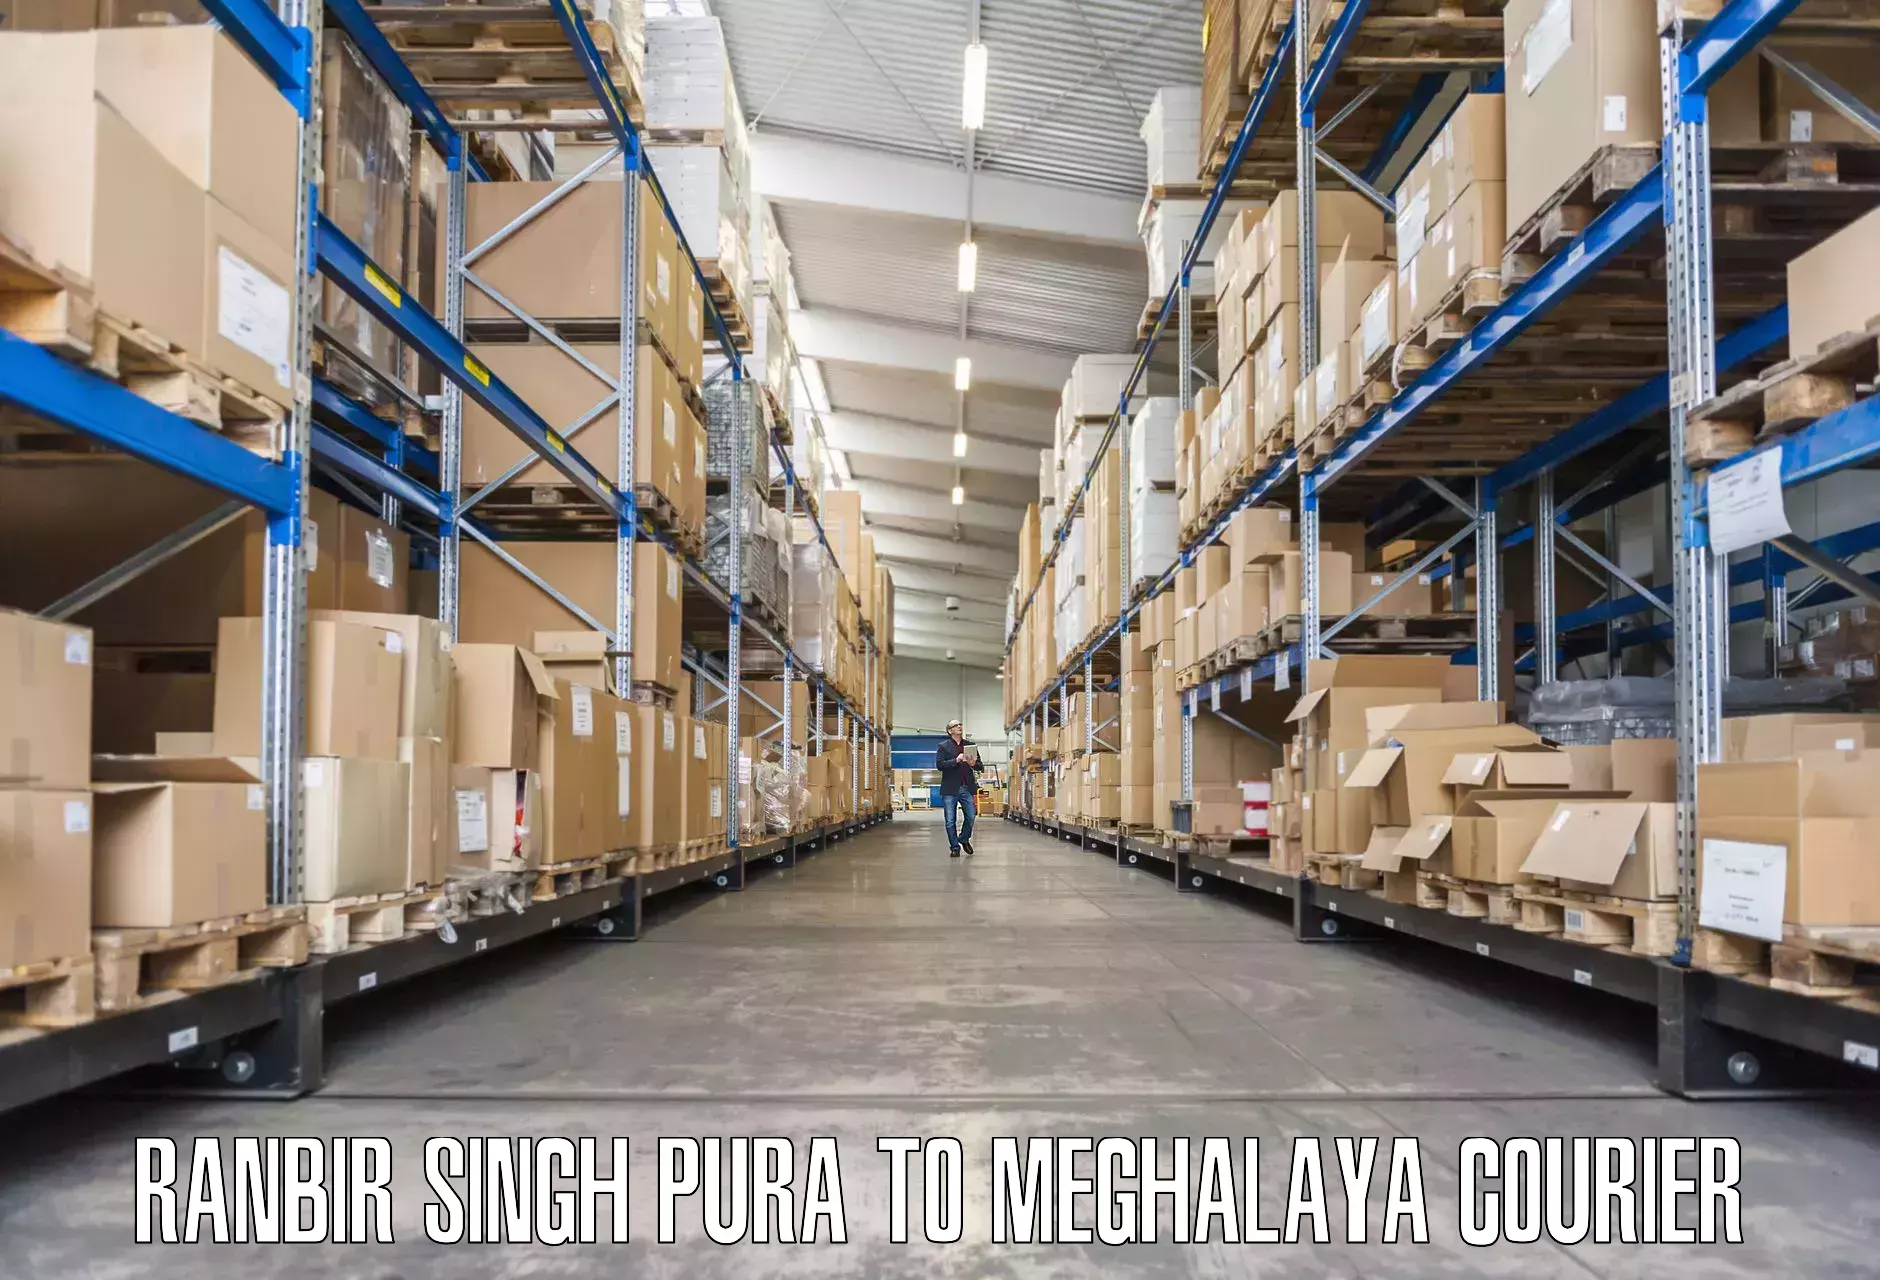 Home moving specialists Ranbir Singh Pura to Dkhiah West